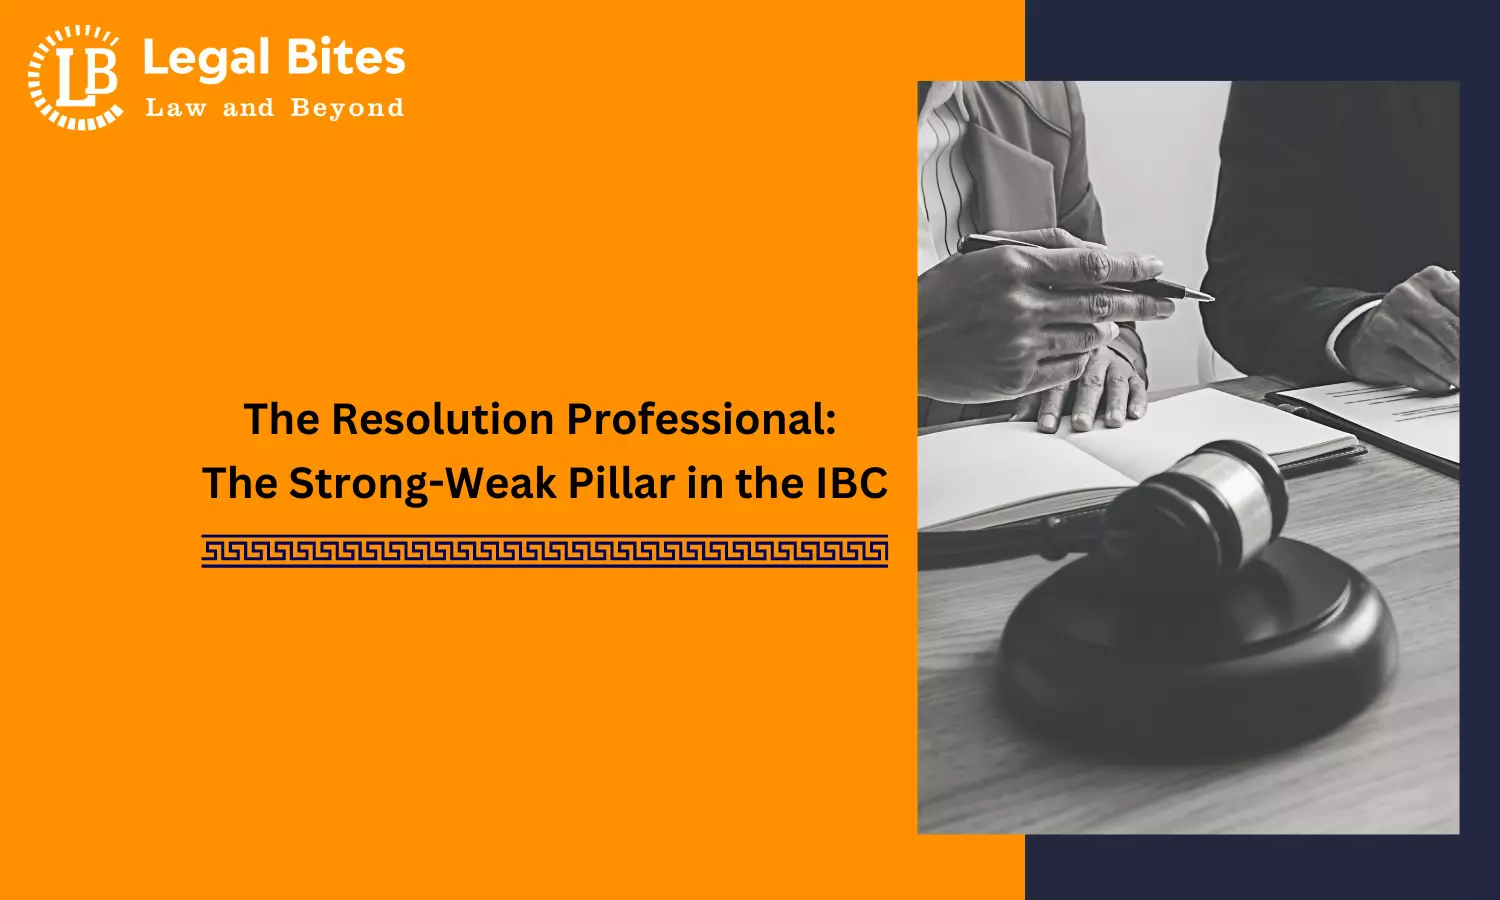 The Resolution Professional: The Strong-Weak Pillar in the IBC